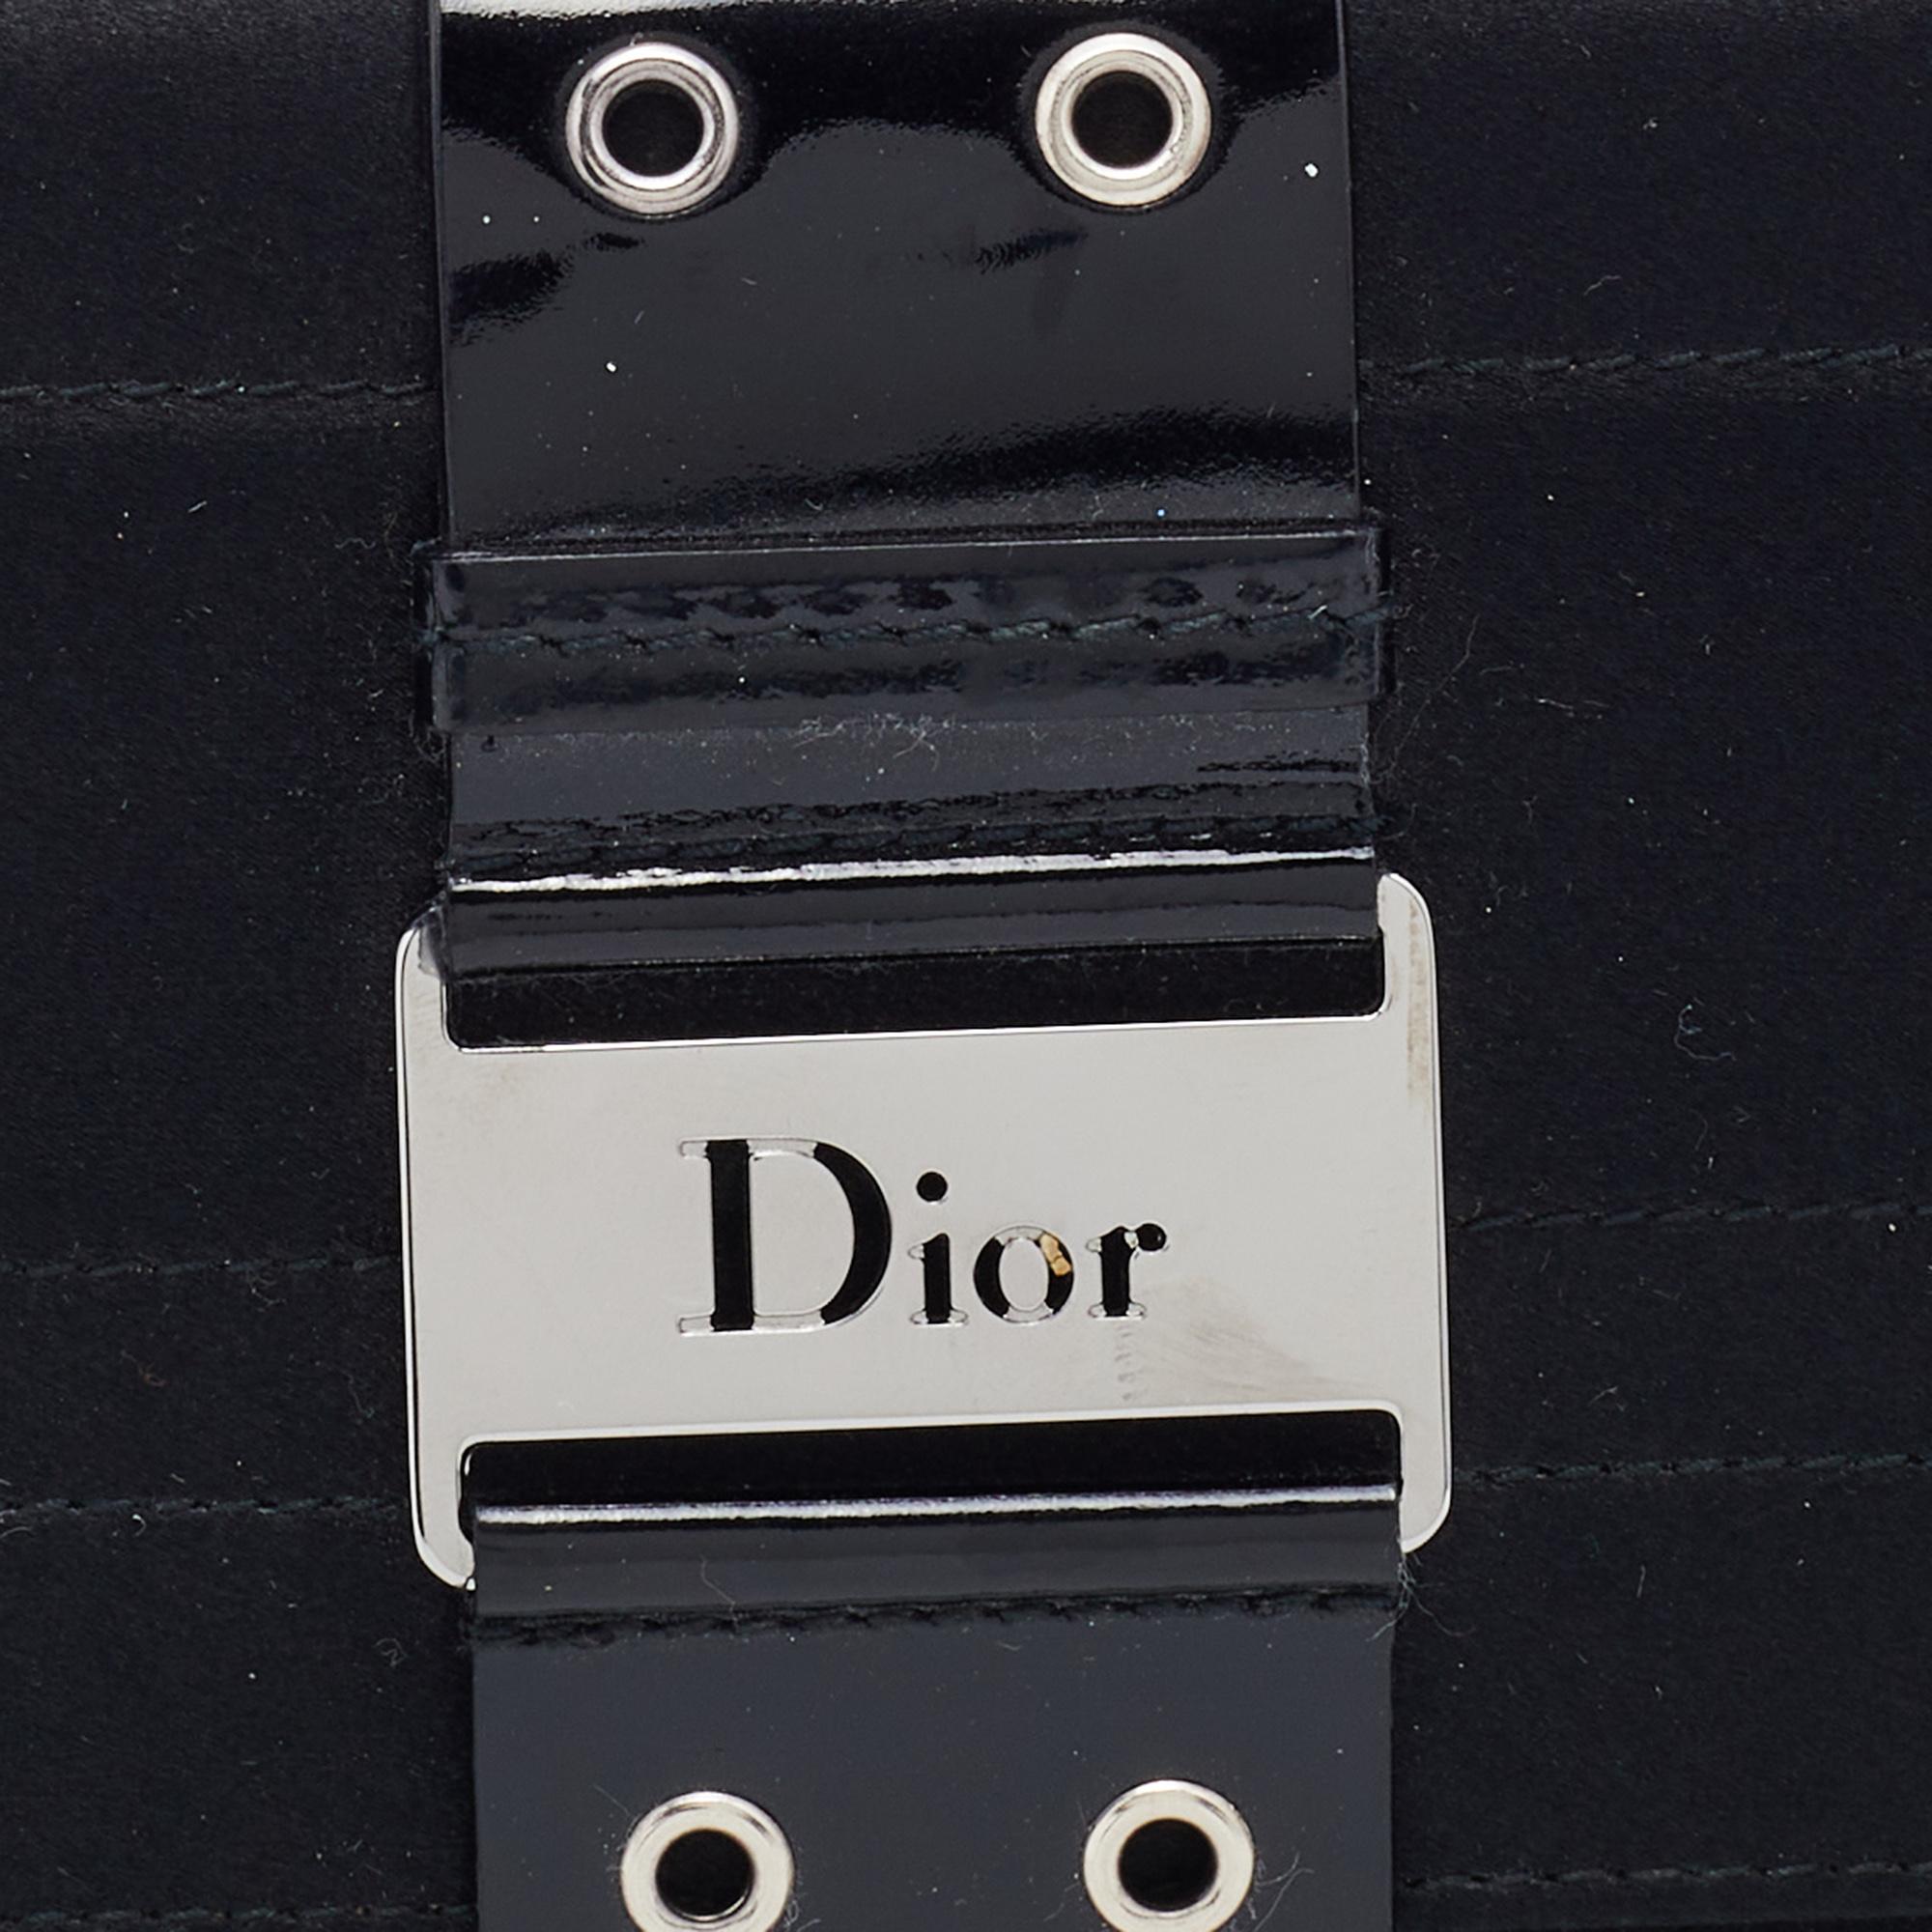 Dior Black Satin And Patent Leather Street Chic Crossbody Bag 2